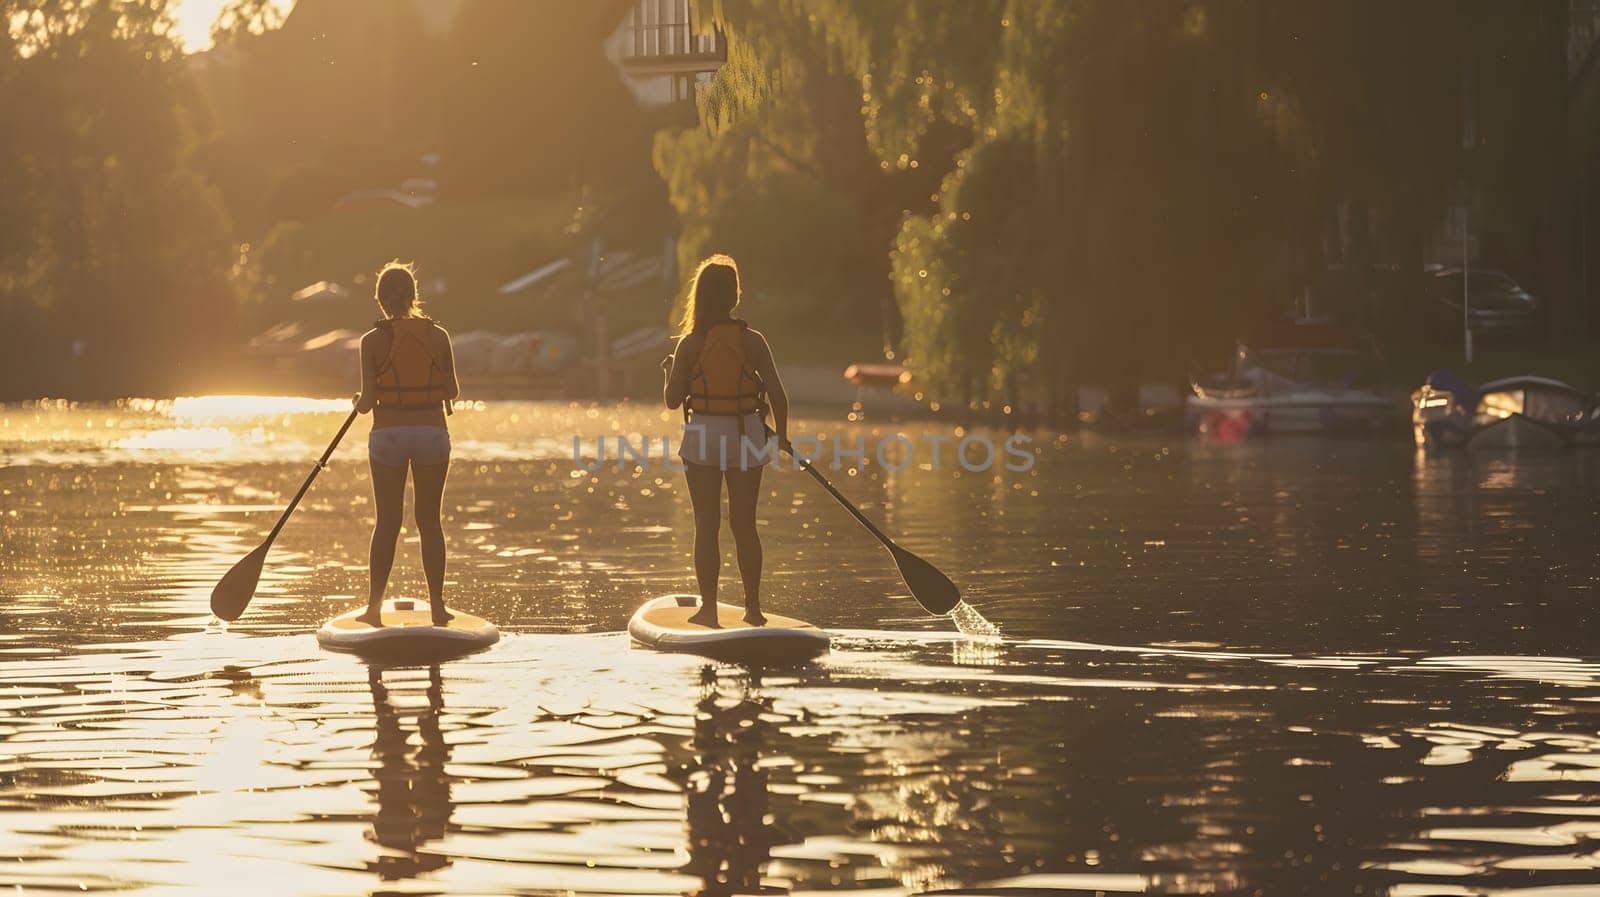 Two women leisurely paddle boarding on a tranquil lake at sunset by Nadtochiy